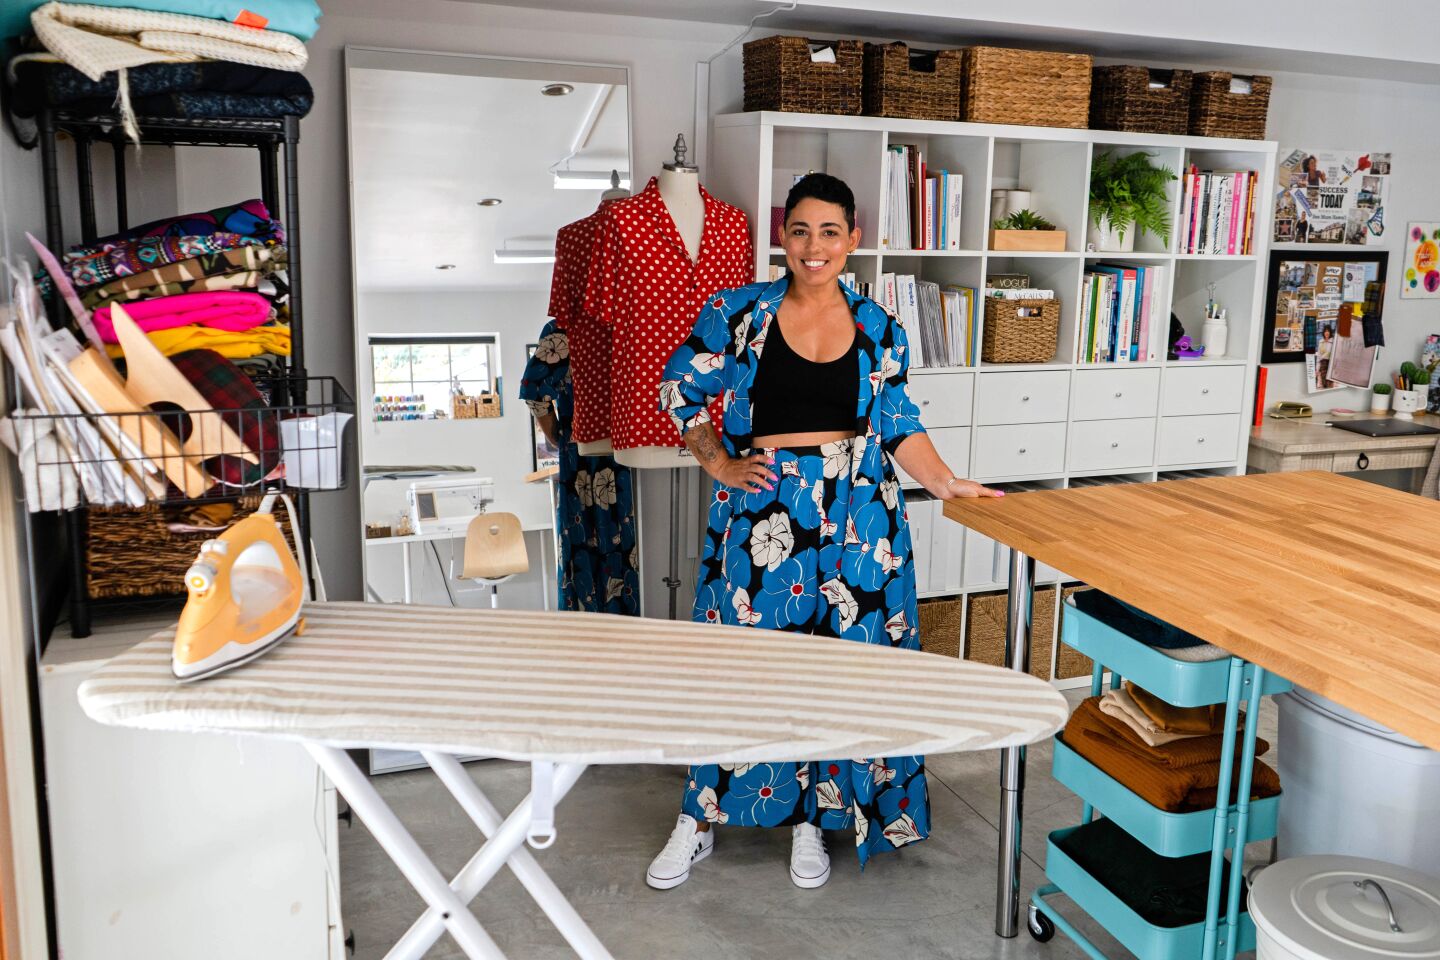 From her sunny home studio in Glendale, Mimi G is building an online sewing empire, one stitch at a time.